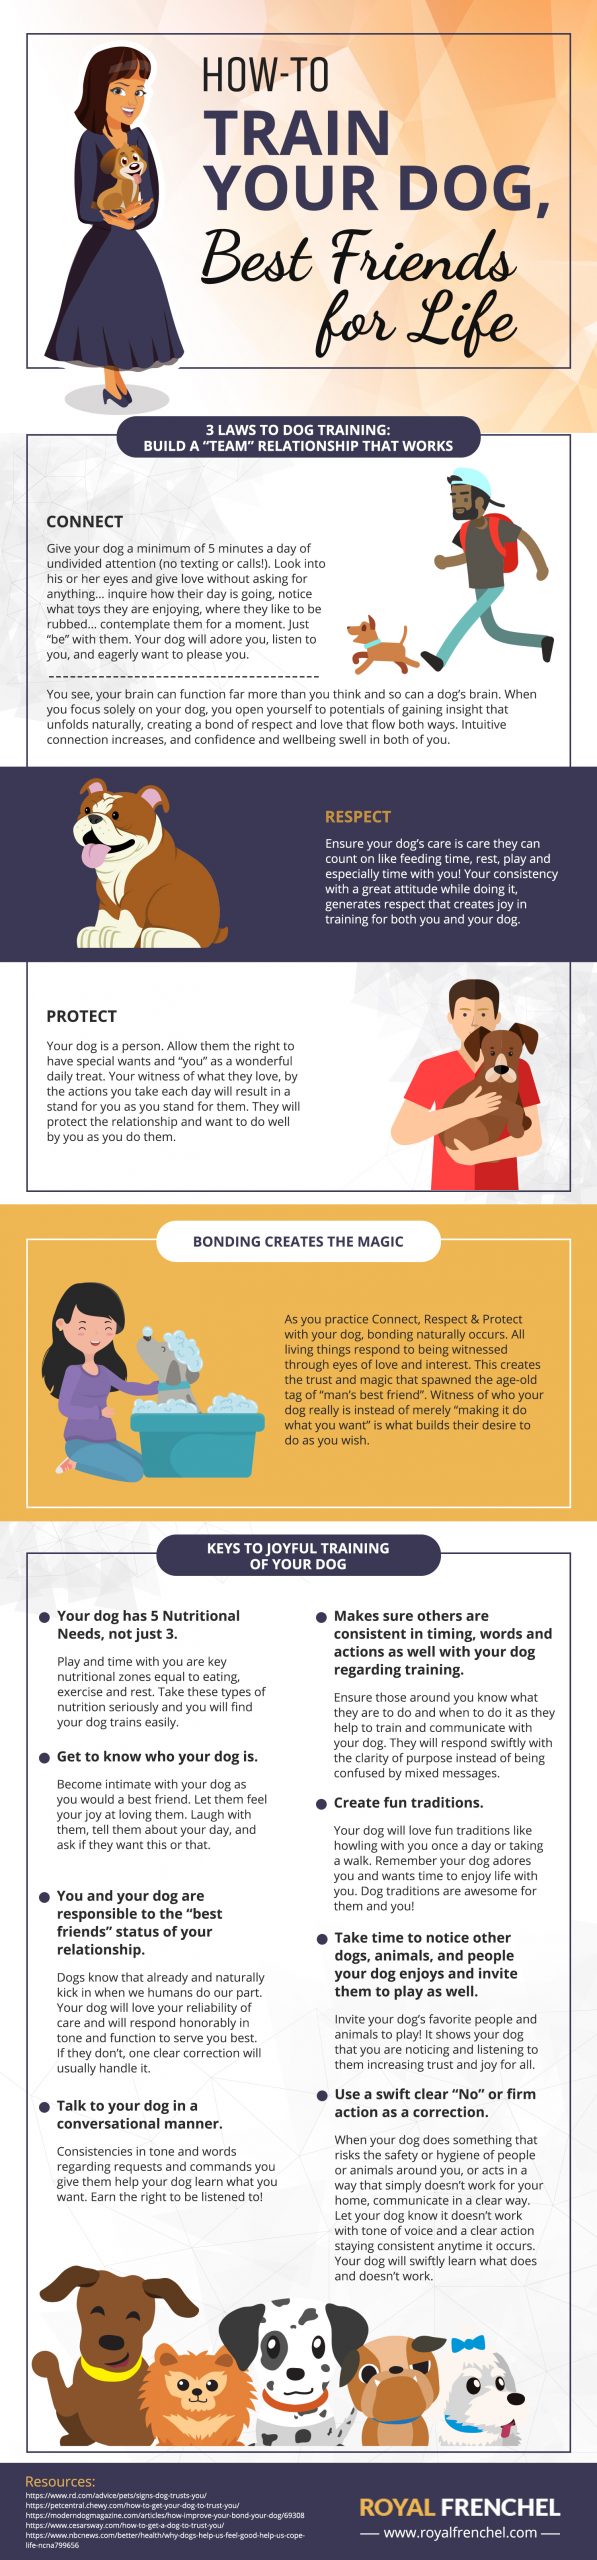 How to build trust with your dog infographic